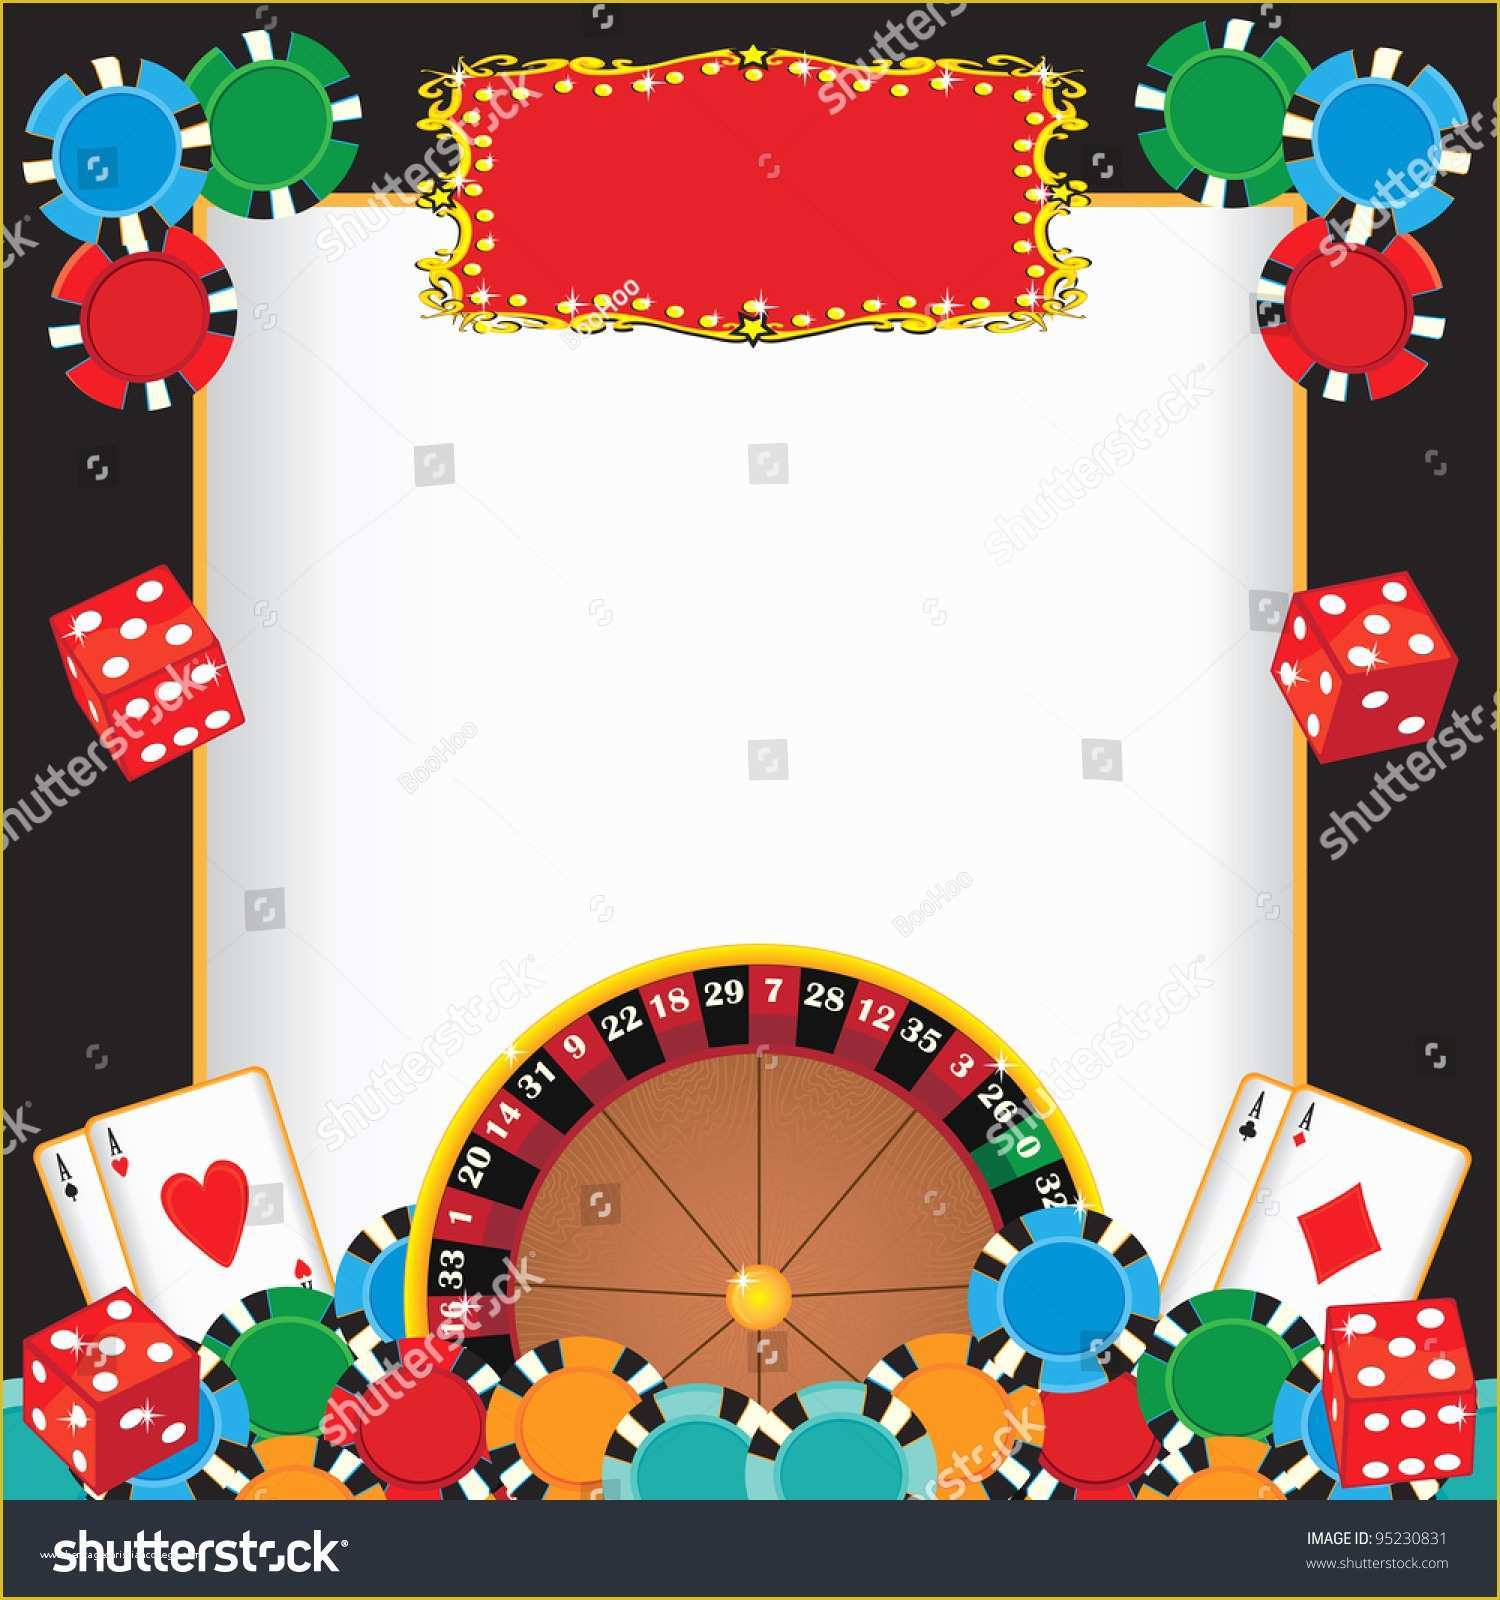 Casino Party Invitations Templates Free Of Casino Night Party event Invitation with Roulette Wheel